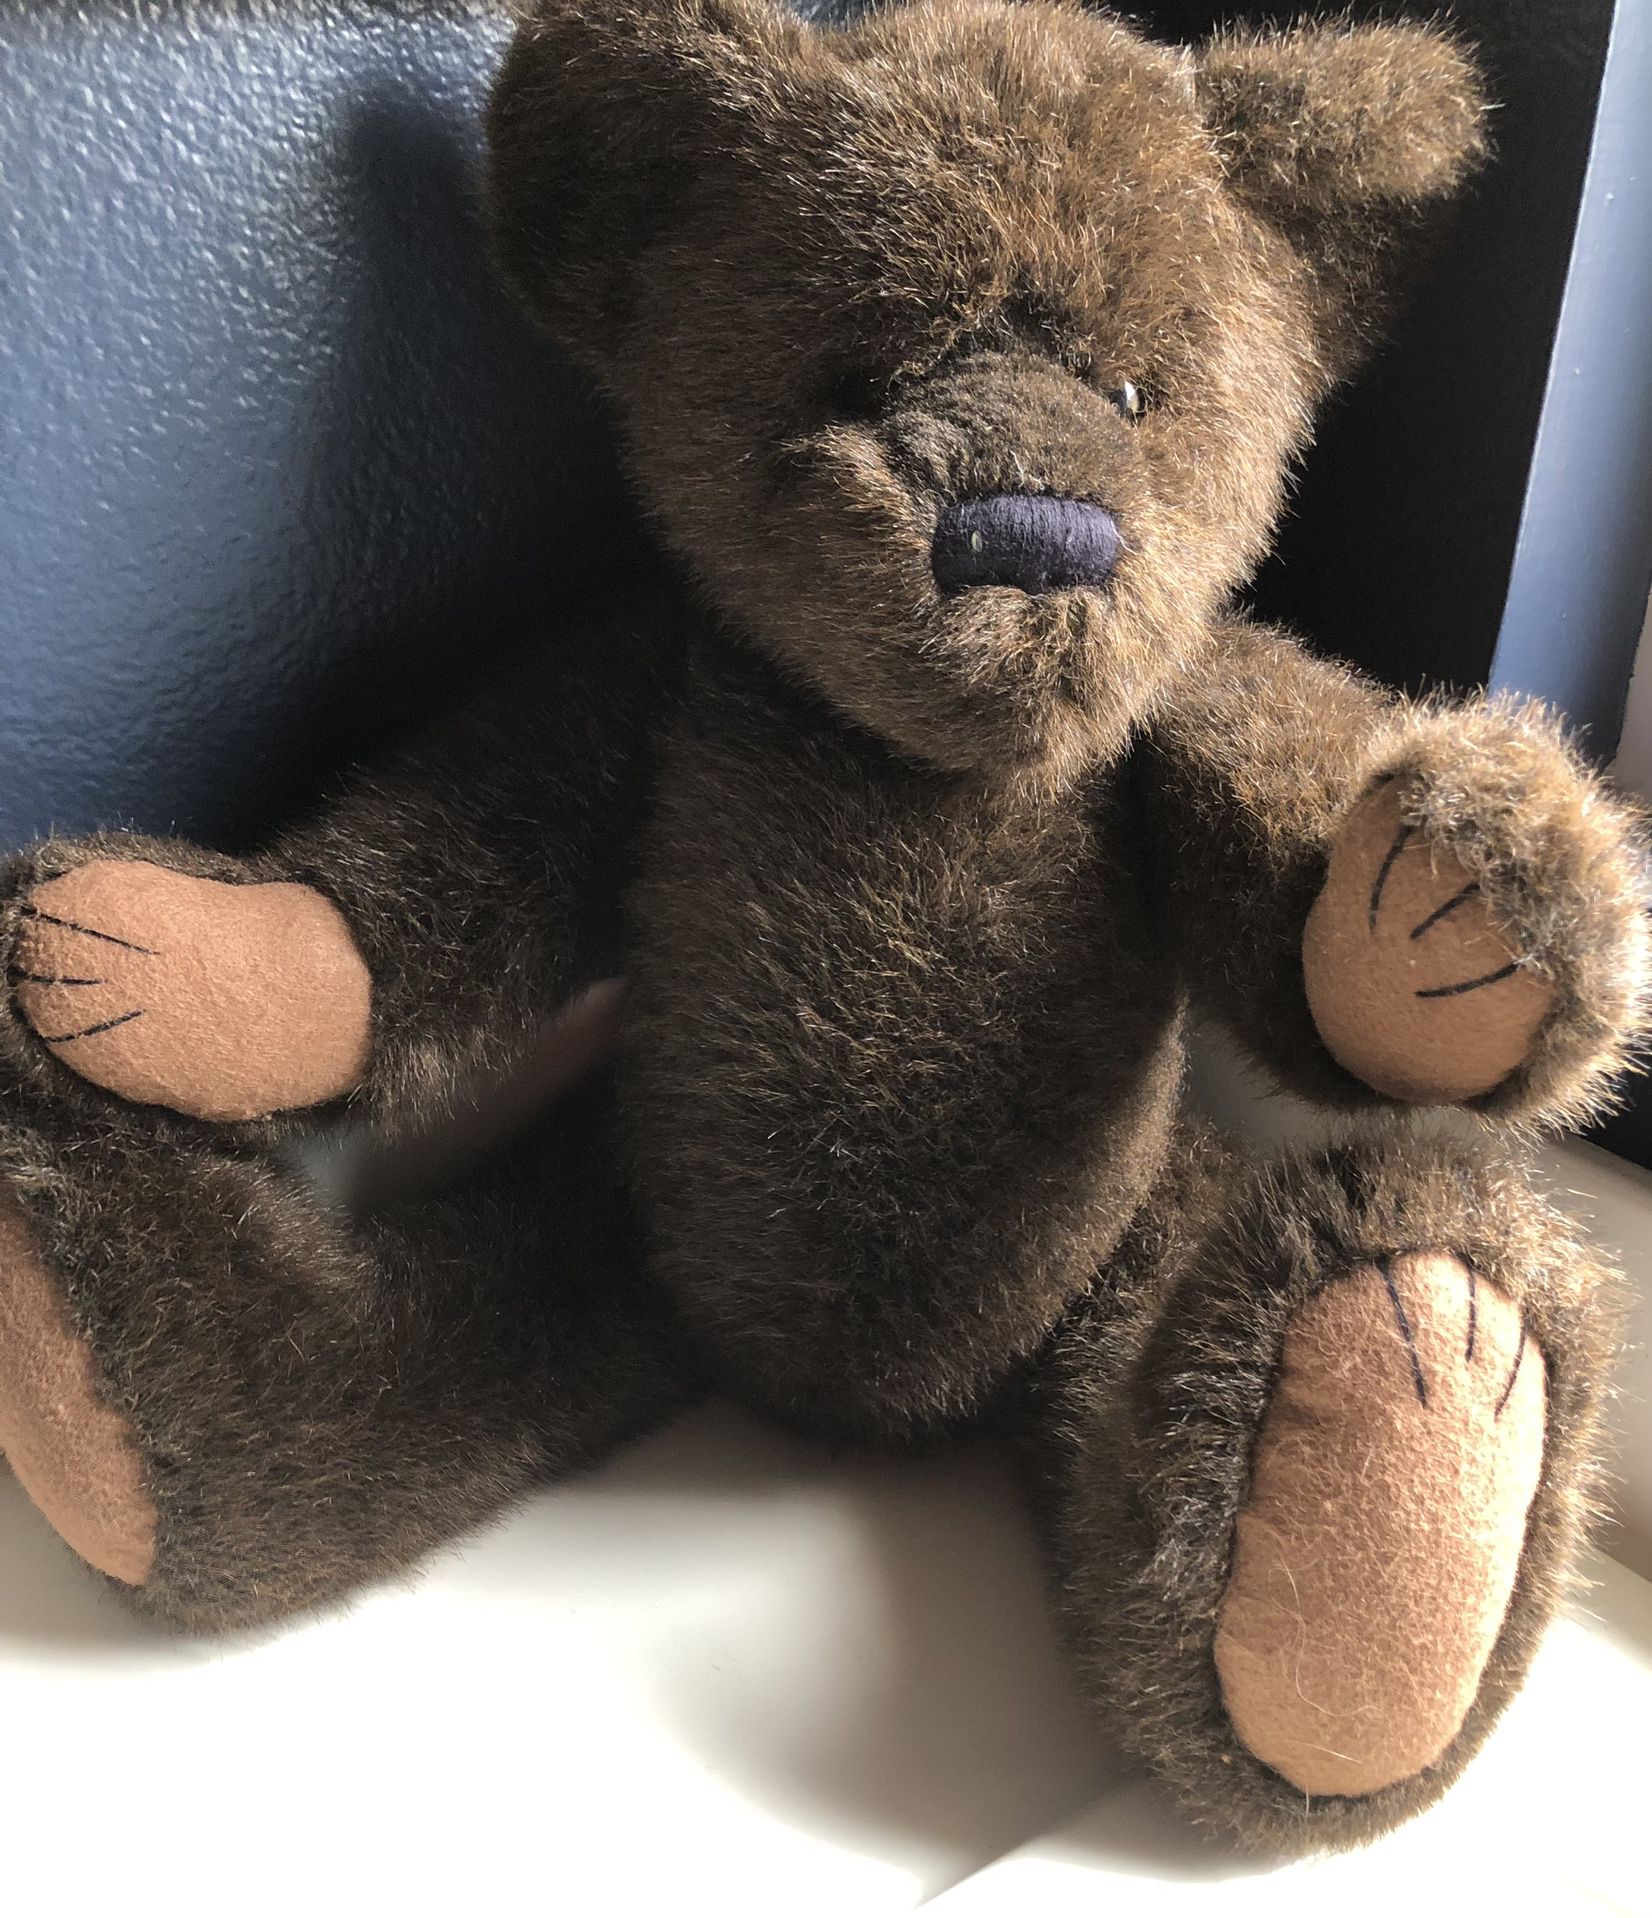 Vintage Boyd’s Bear - The Archive Series #1364